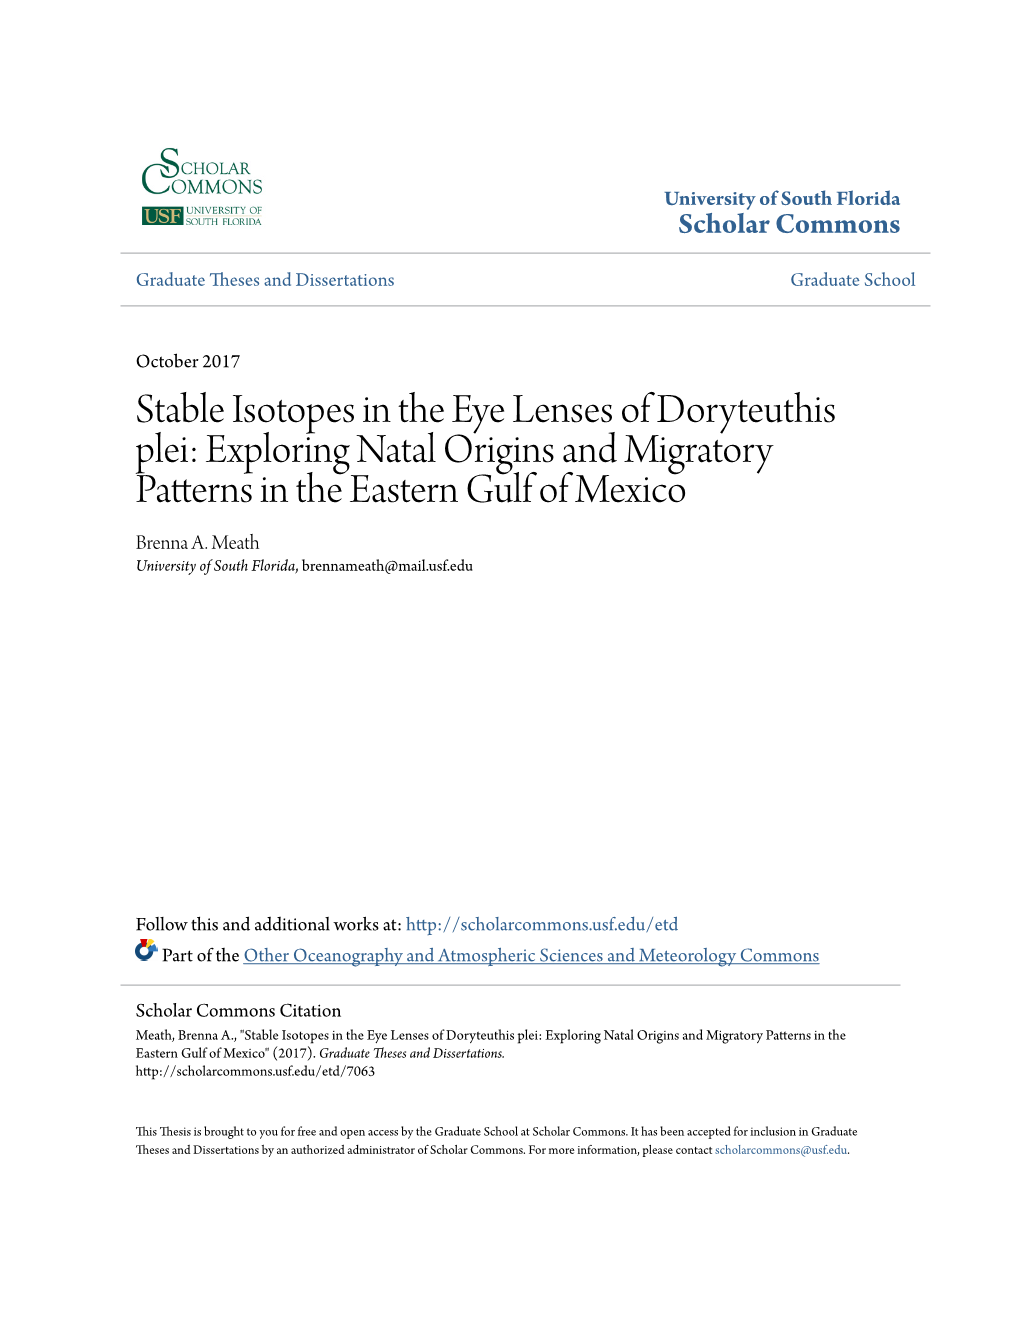 Stable Isotopes in the Eye Lenses of Doryteuthis Plei: Exploring Natal Origins and Migratory Patterns in the Eastern Gulf of Mexico Brenna A